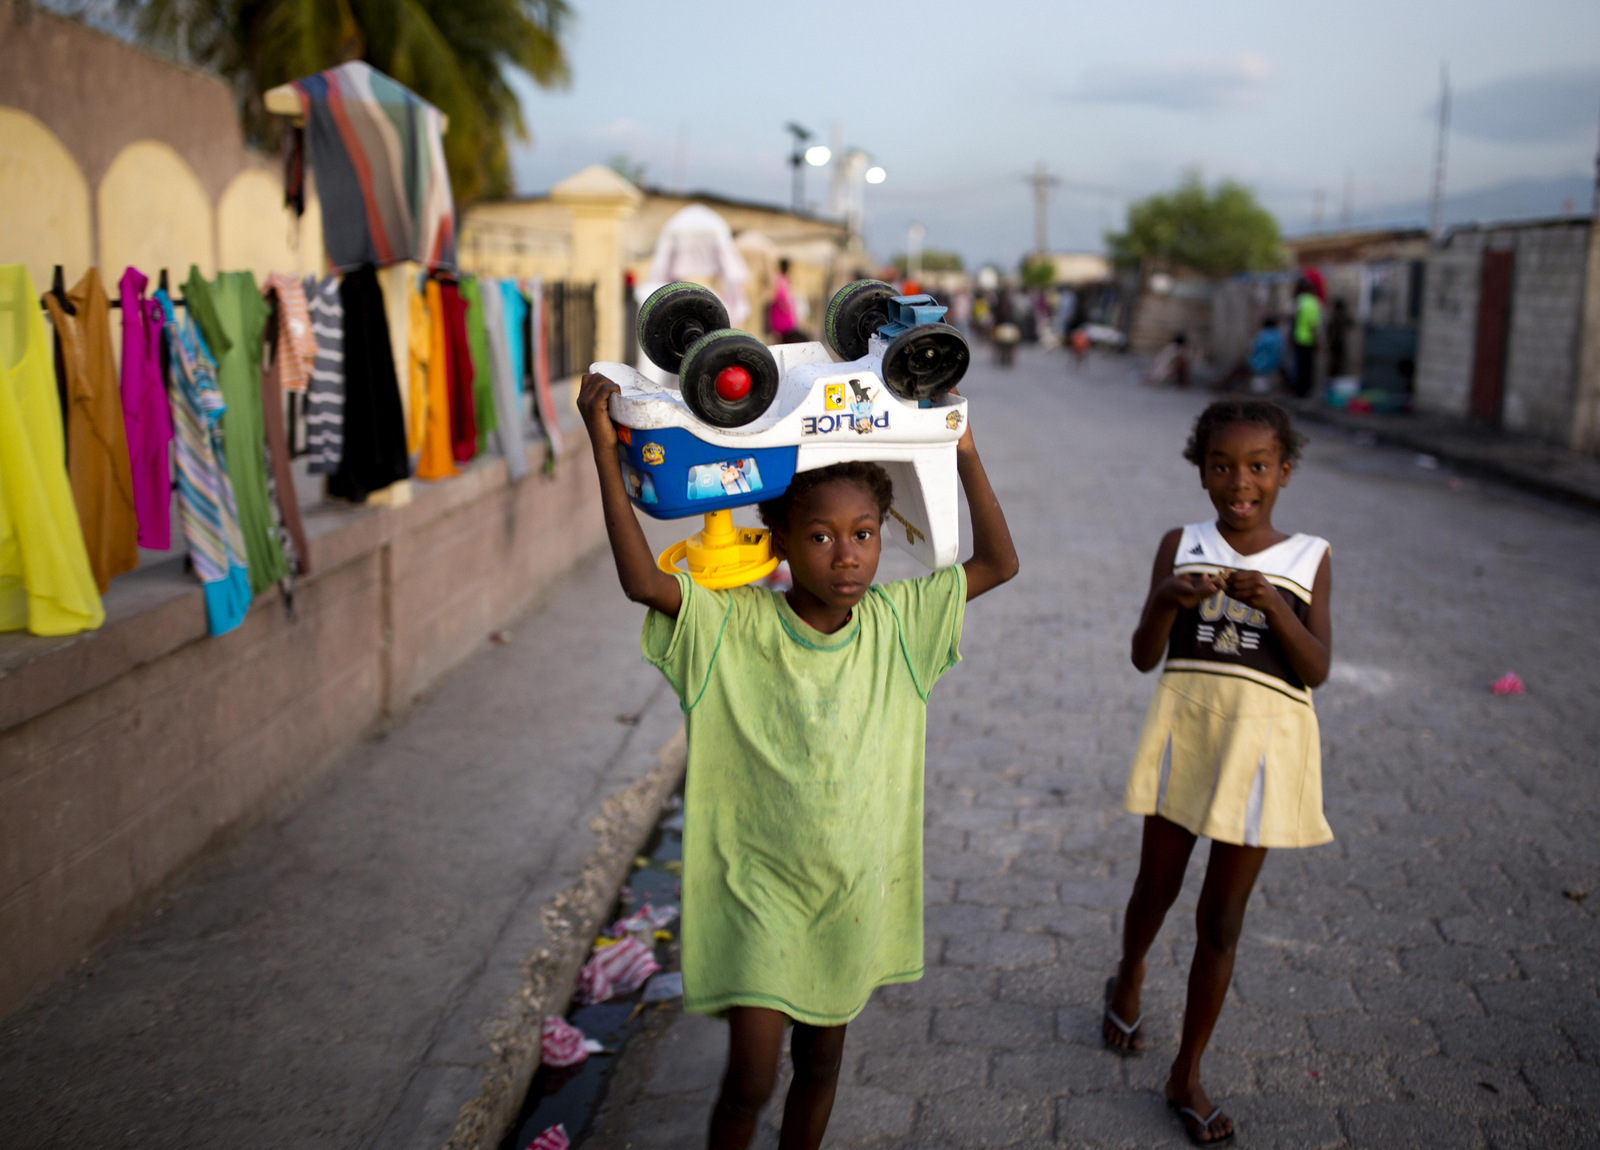 A girl carries her toy police car home along with her sister in the Cite Soleil slum of Port-au-Prince, Haiti, Dec. 27, 2017. (AP/Dieu Nalio Chery)